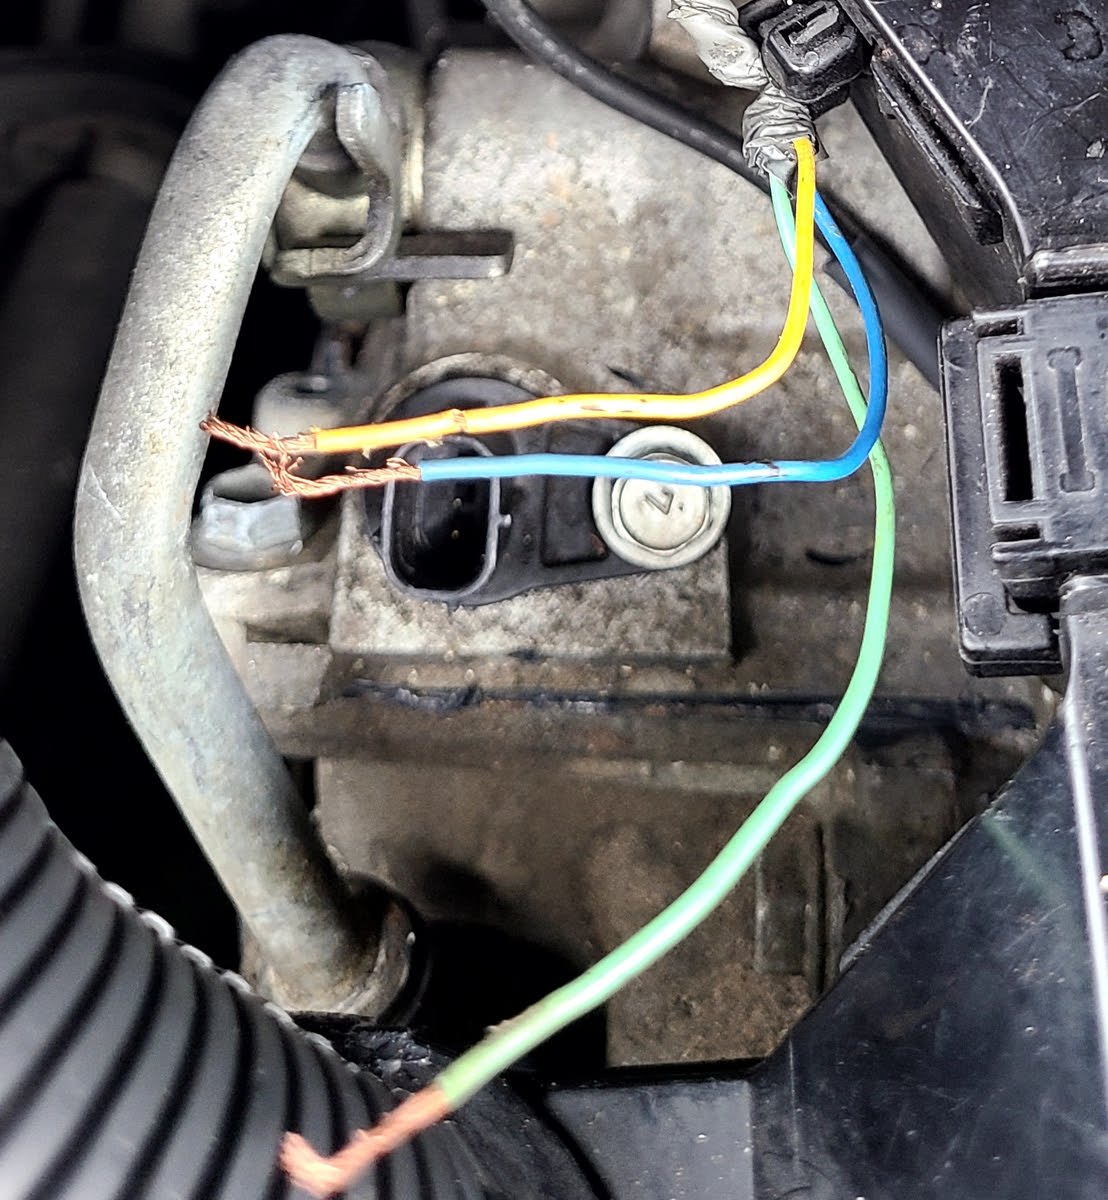 Toyota Camry Questions - I Cannot Figure Out Wiring - CarGurus